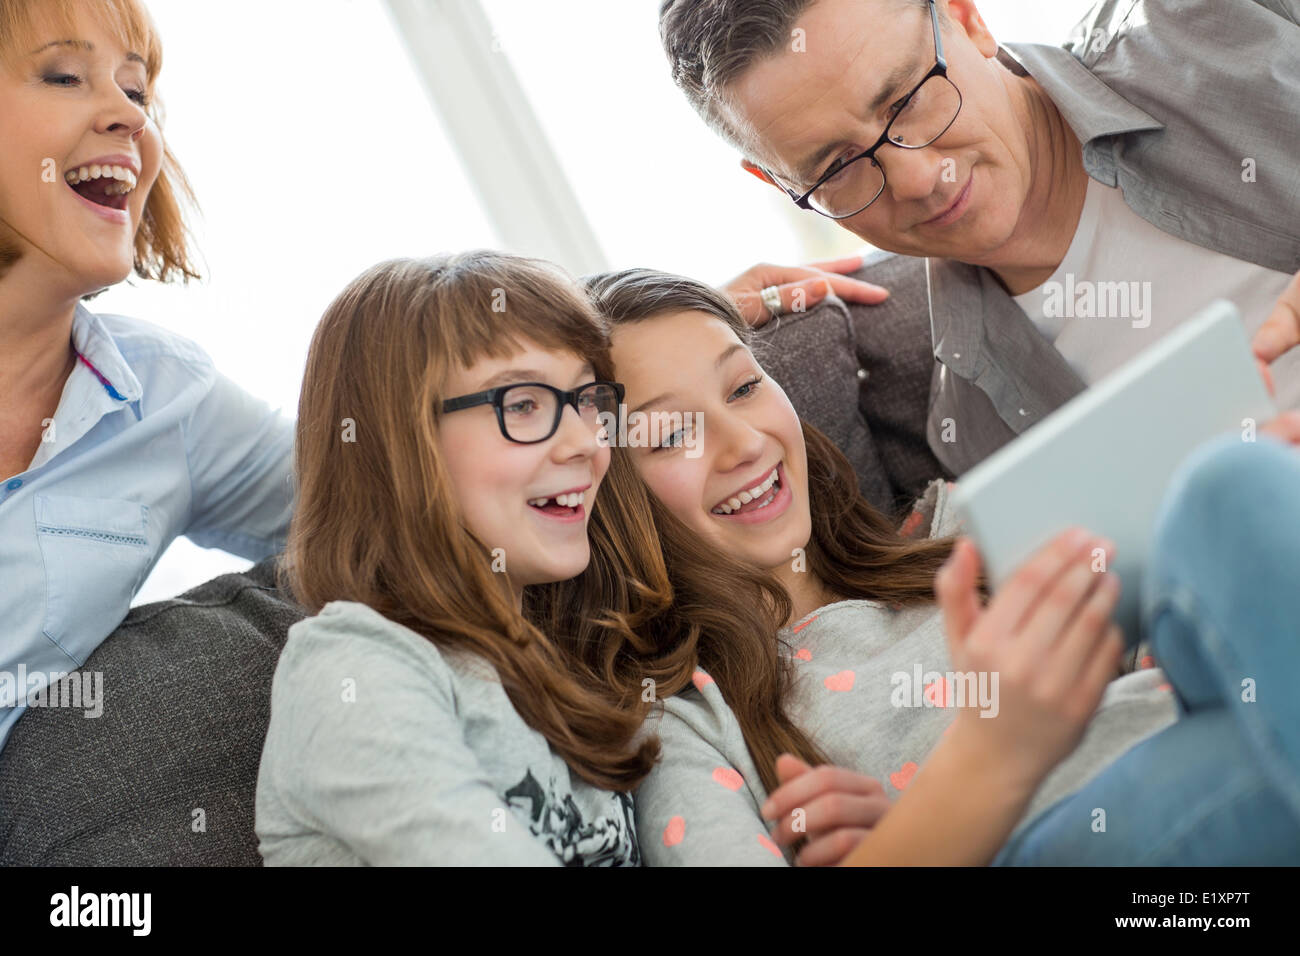 Happy Family using tablet PC at home Banque D'Images